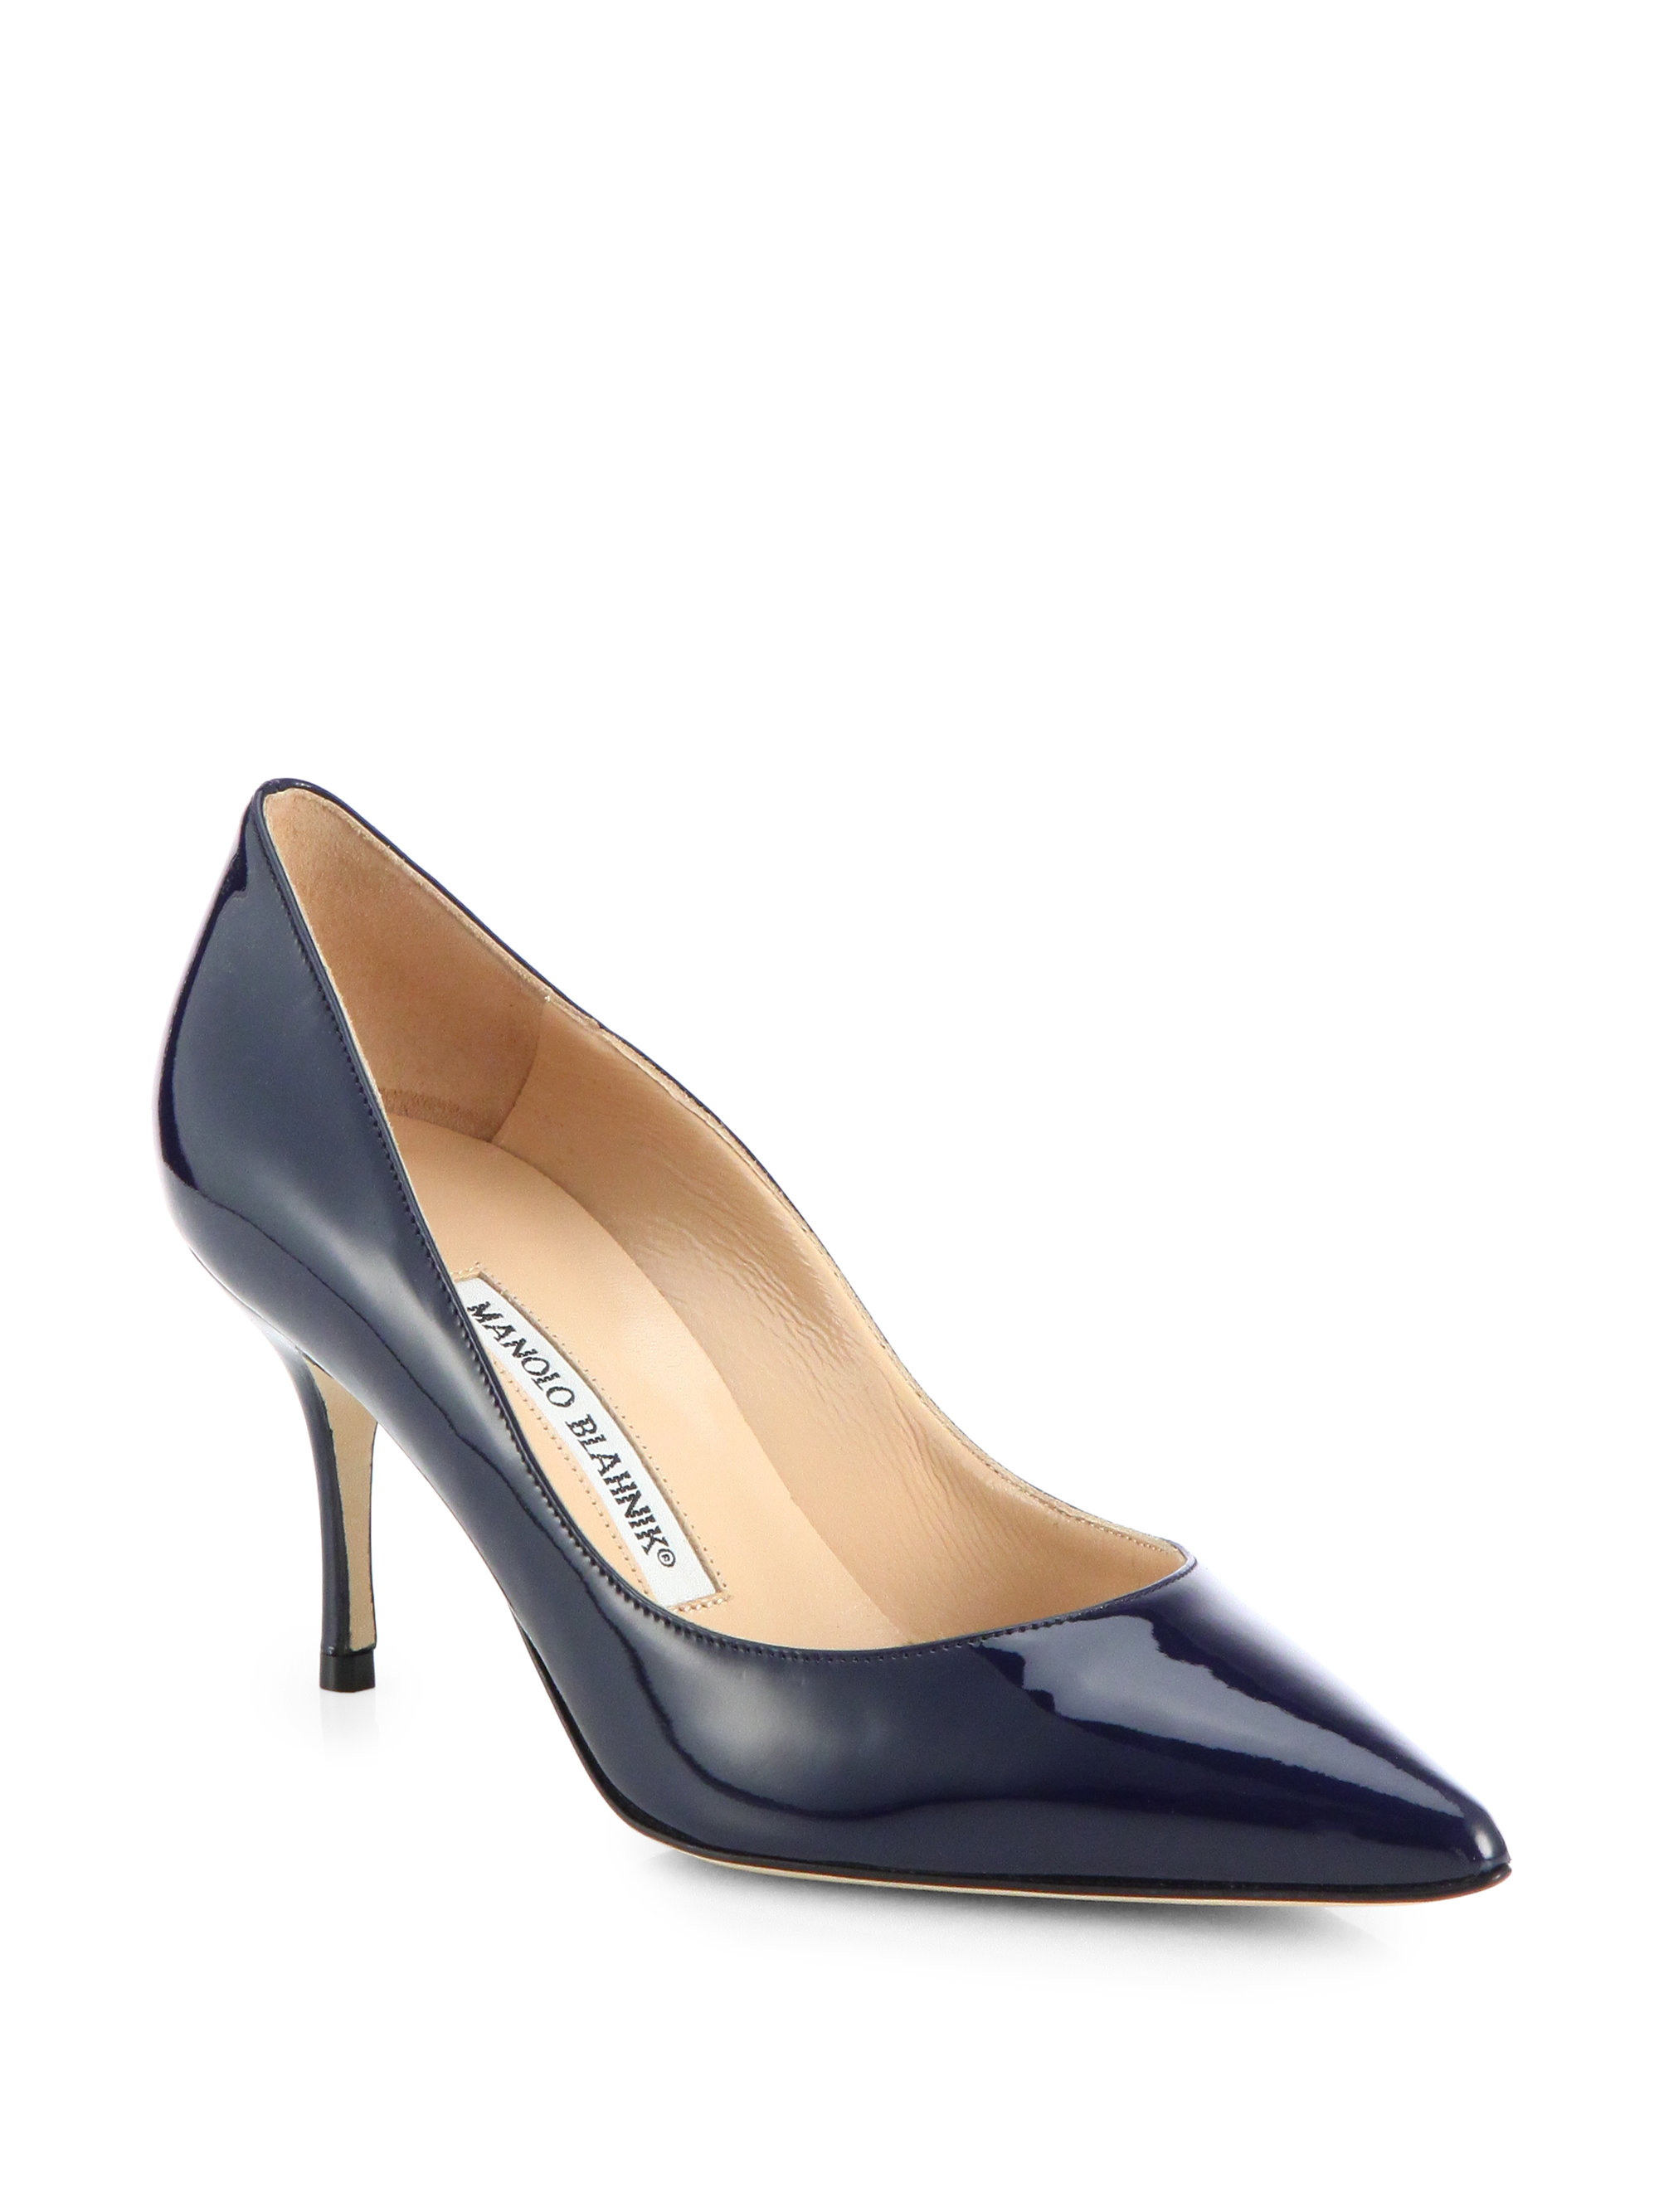 Lyst - Manolo Blahnik Nausikaba Scooped Patent Leather Pumps in Blue